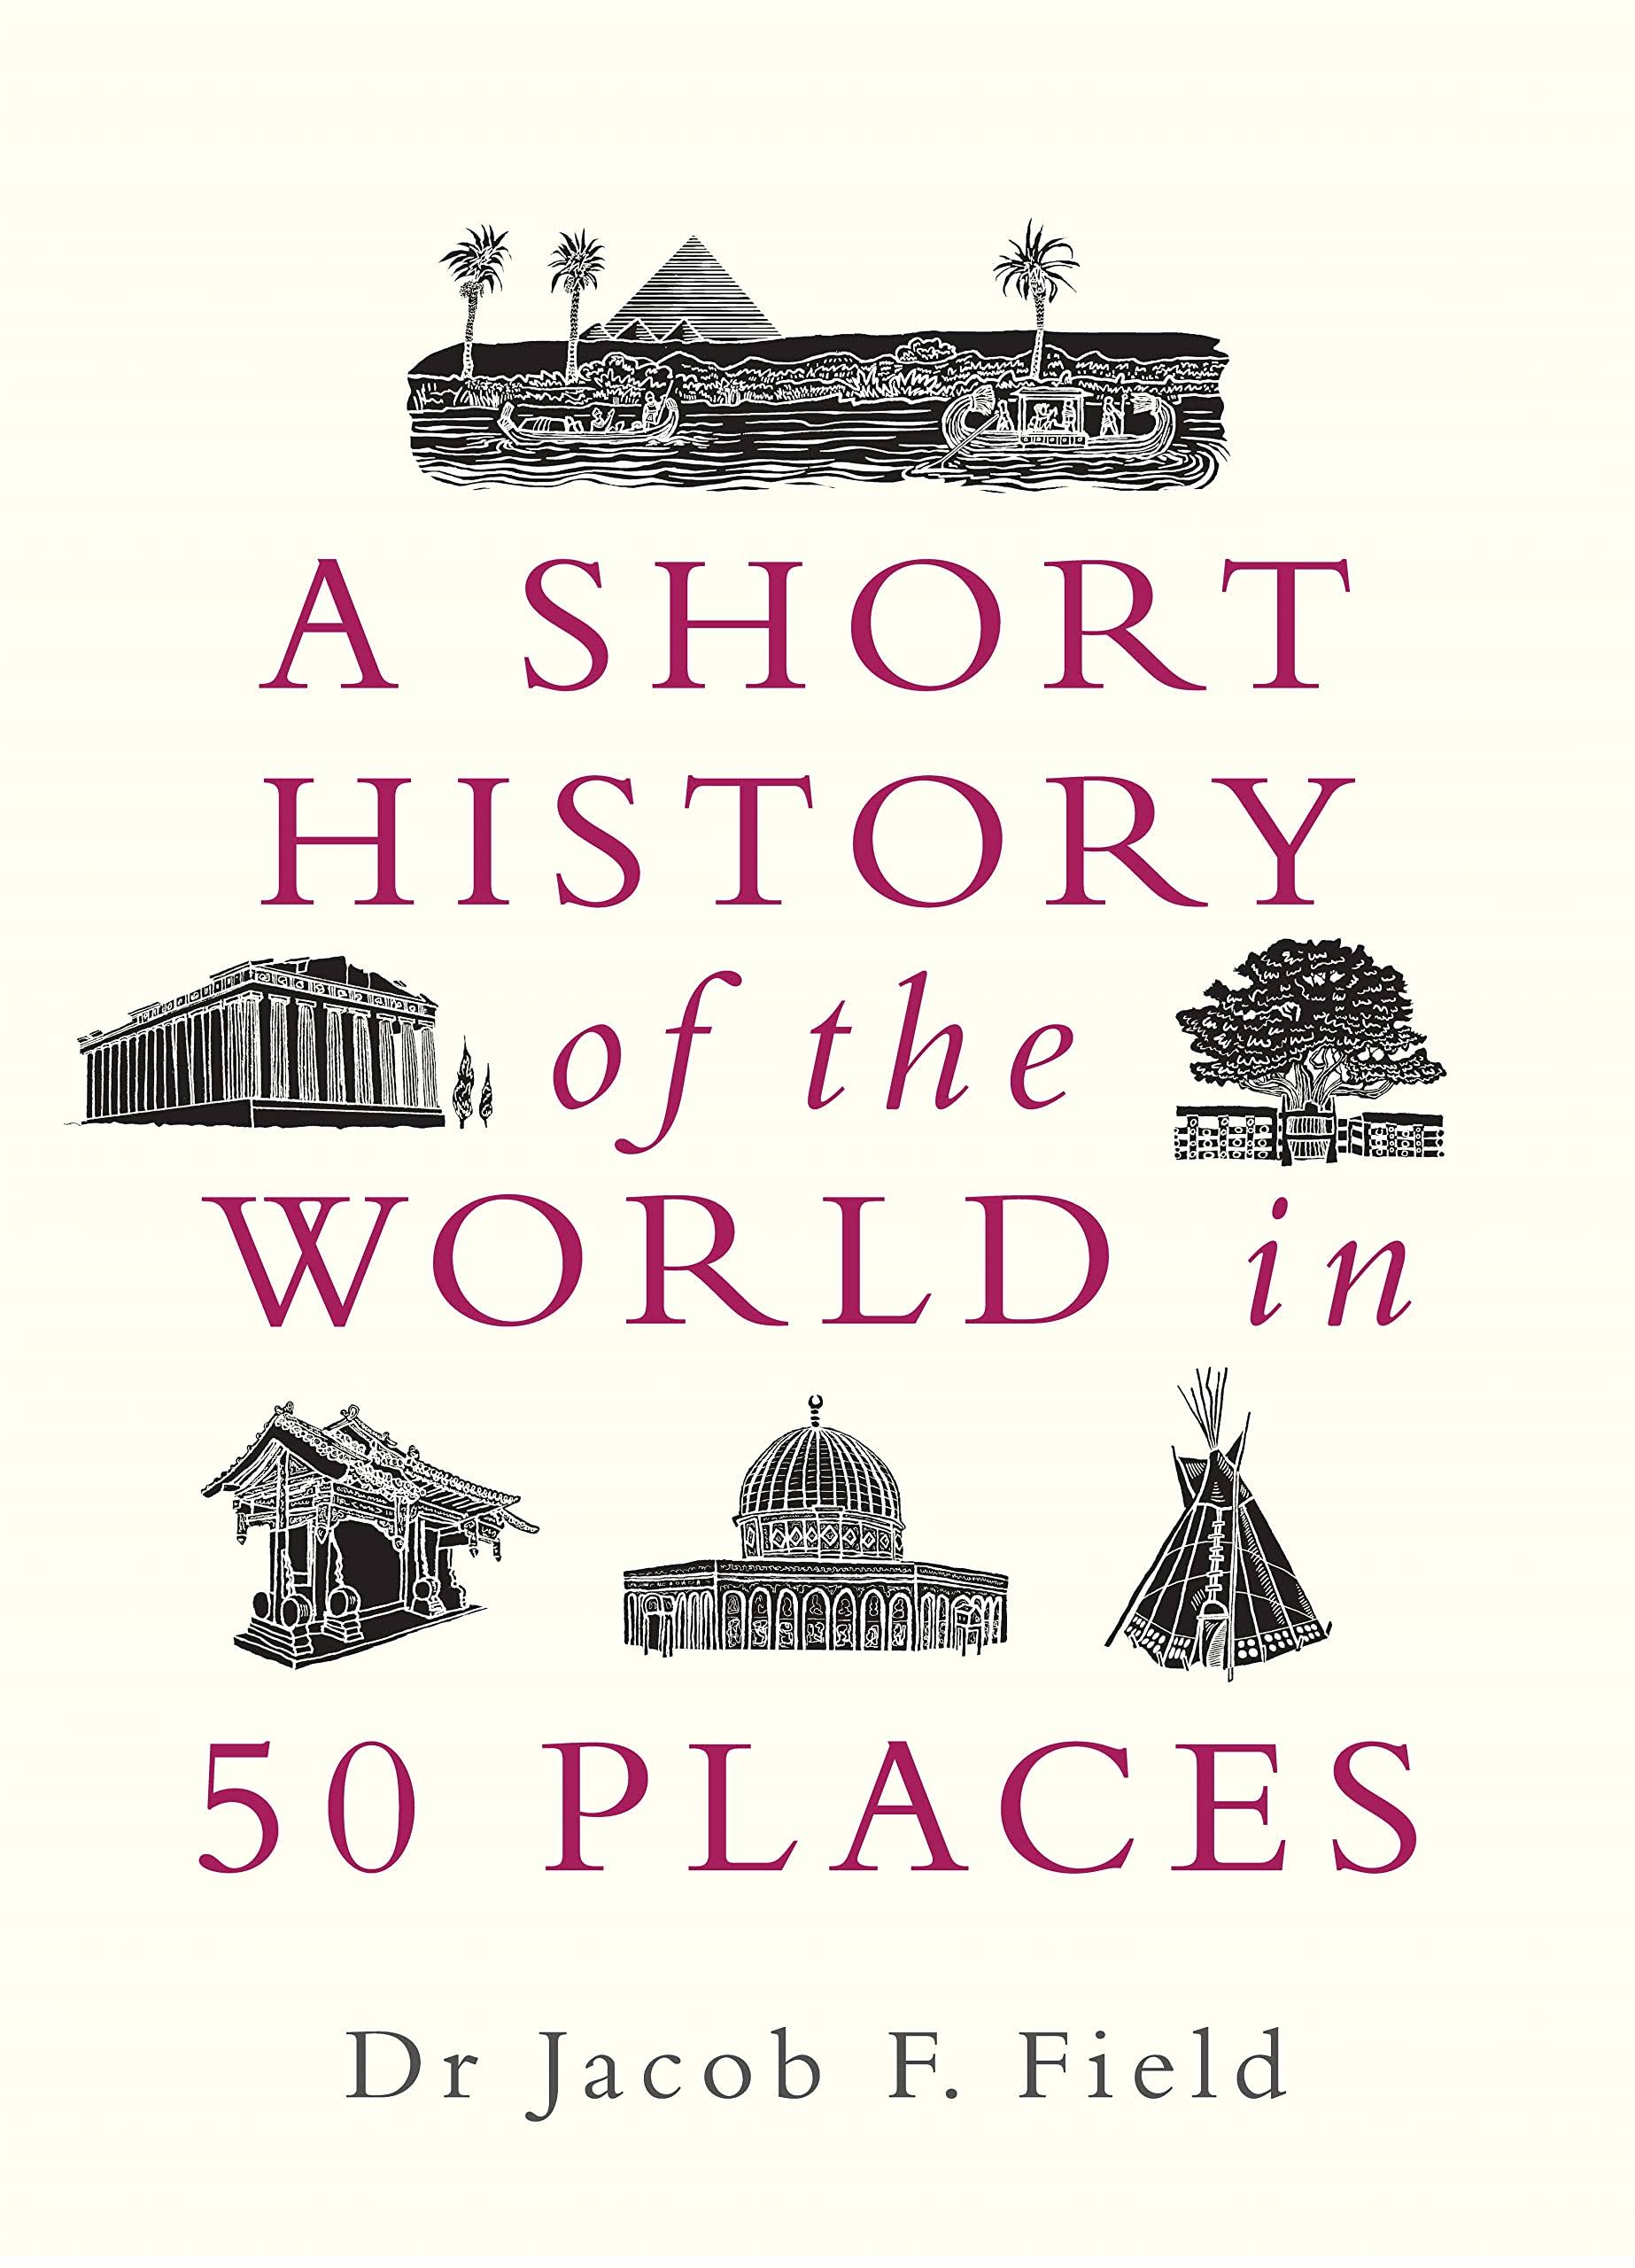 A Short History of the World in 50 Places [Book]